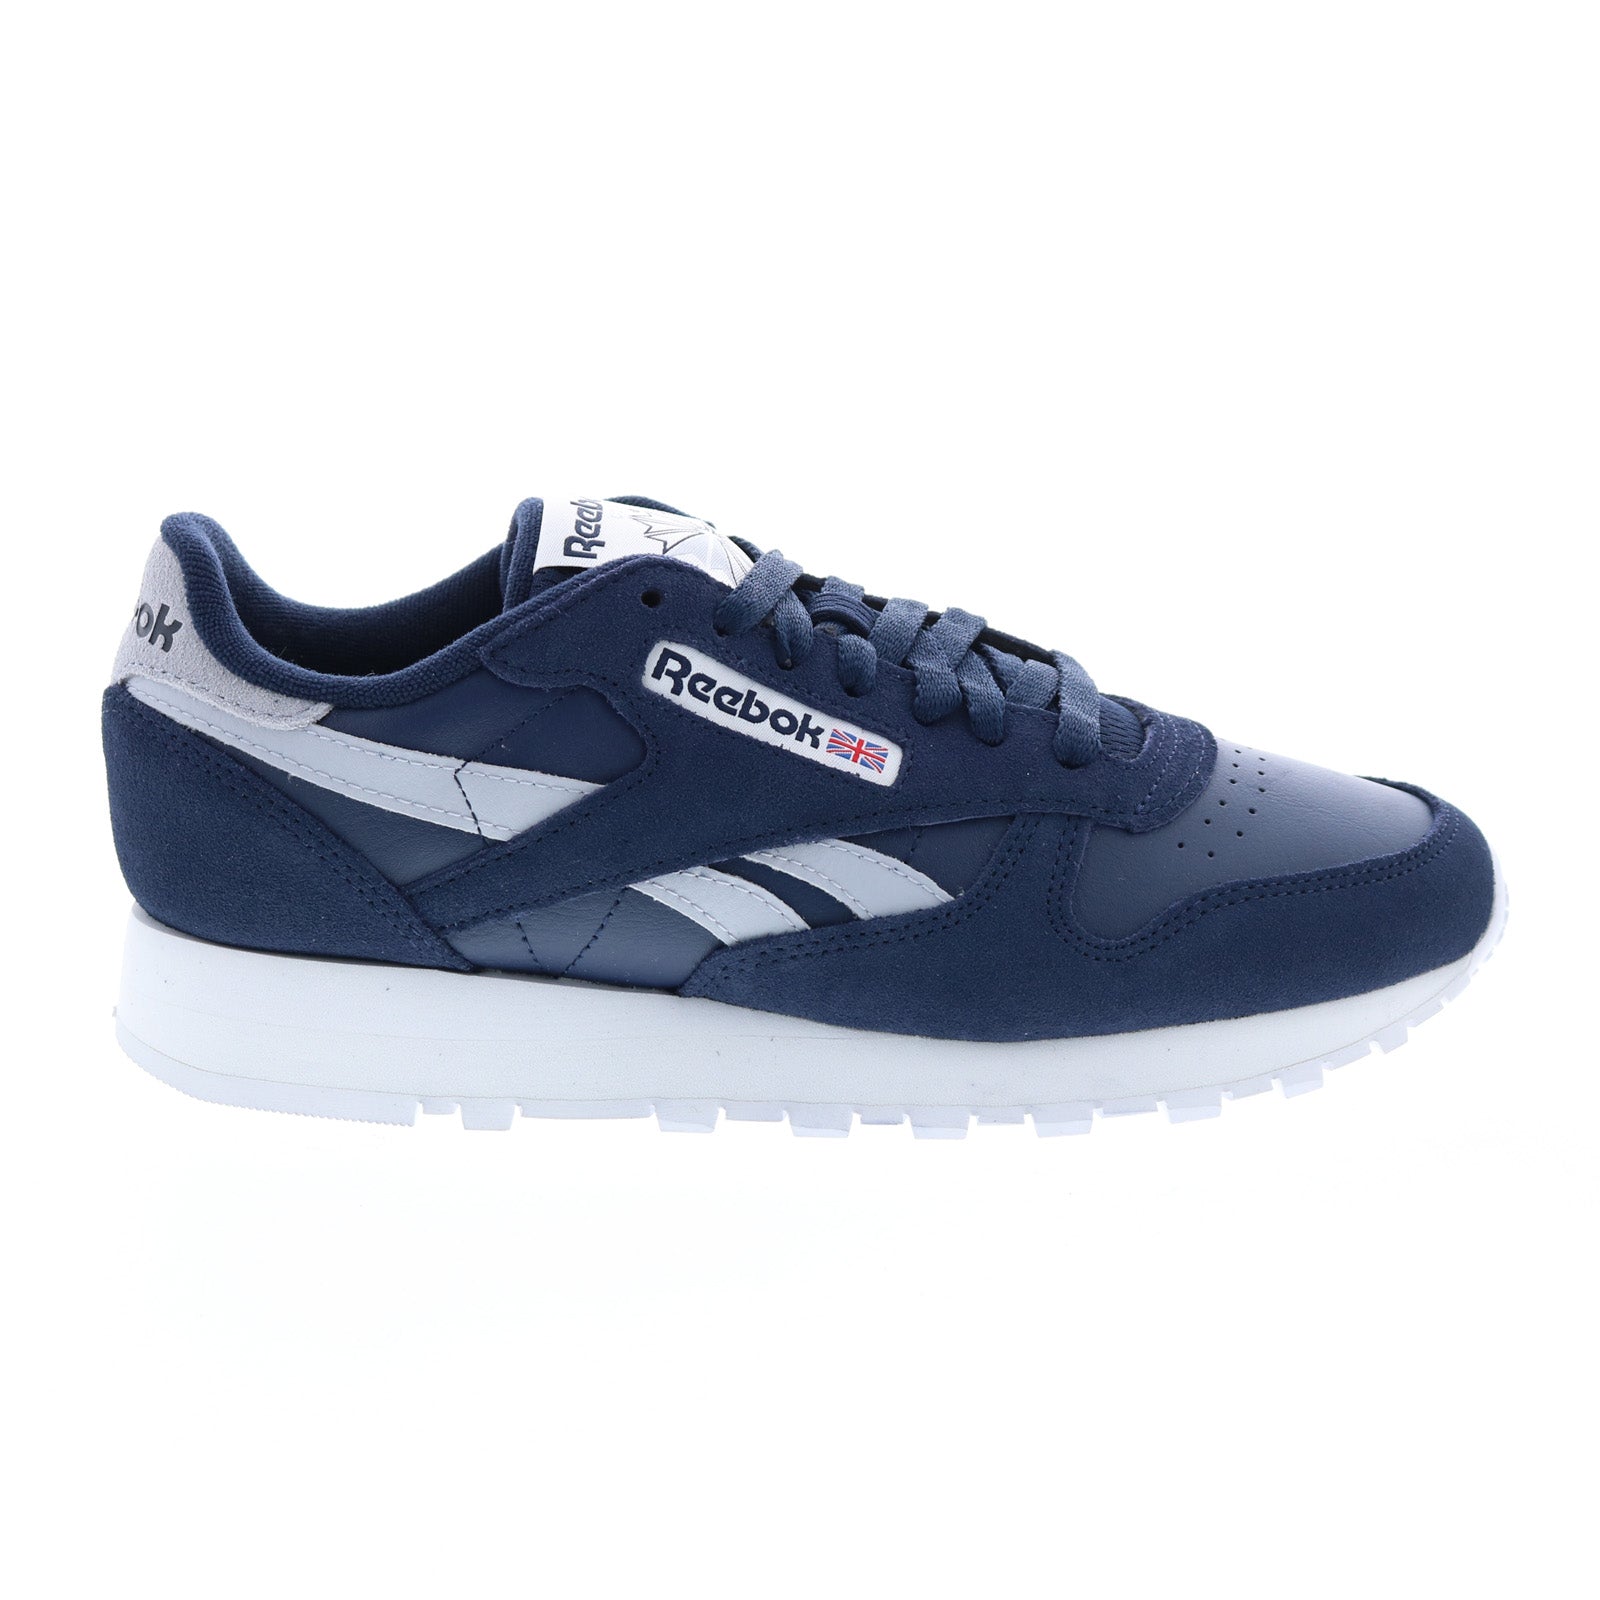 Classic Mens Blue Suede Lifestyle Sneakers Shoes - Ruze Shoes